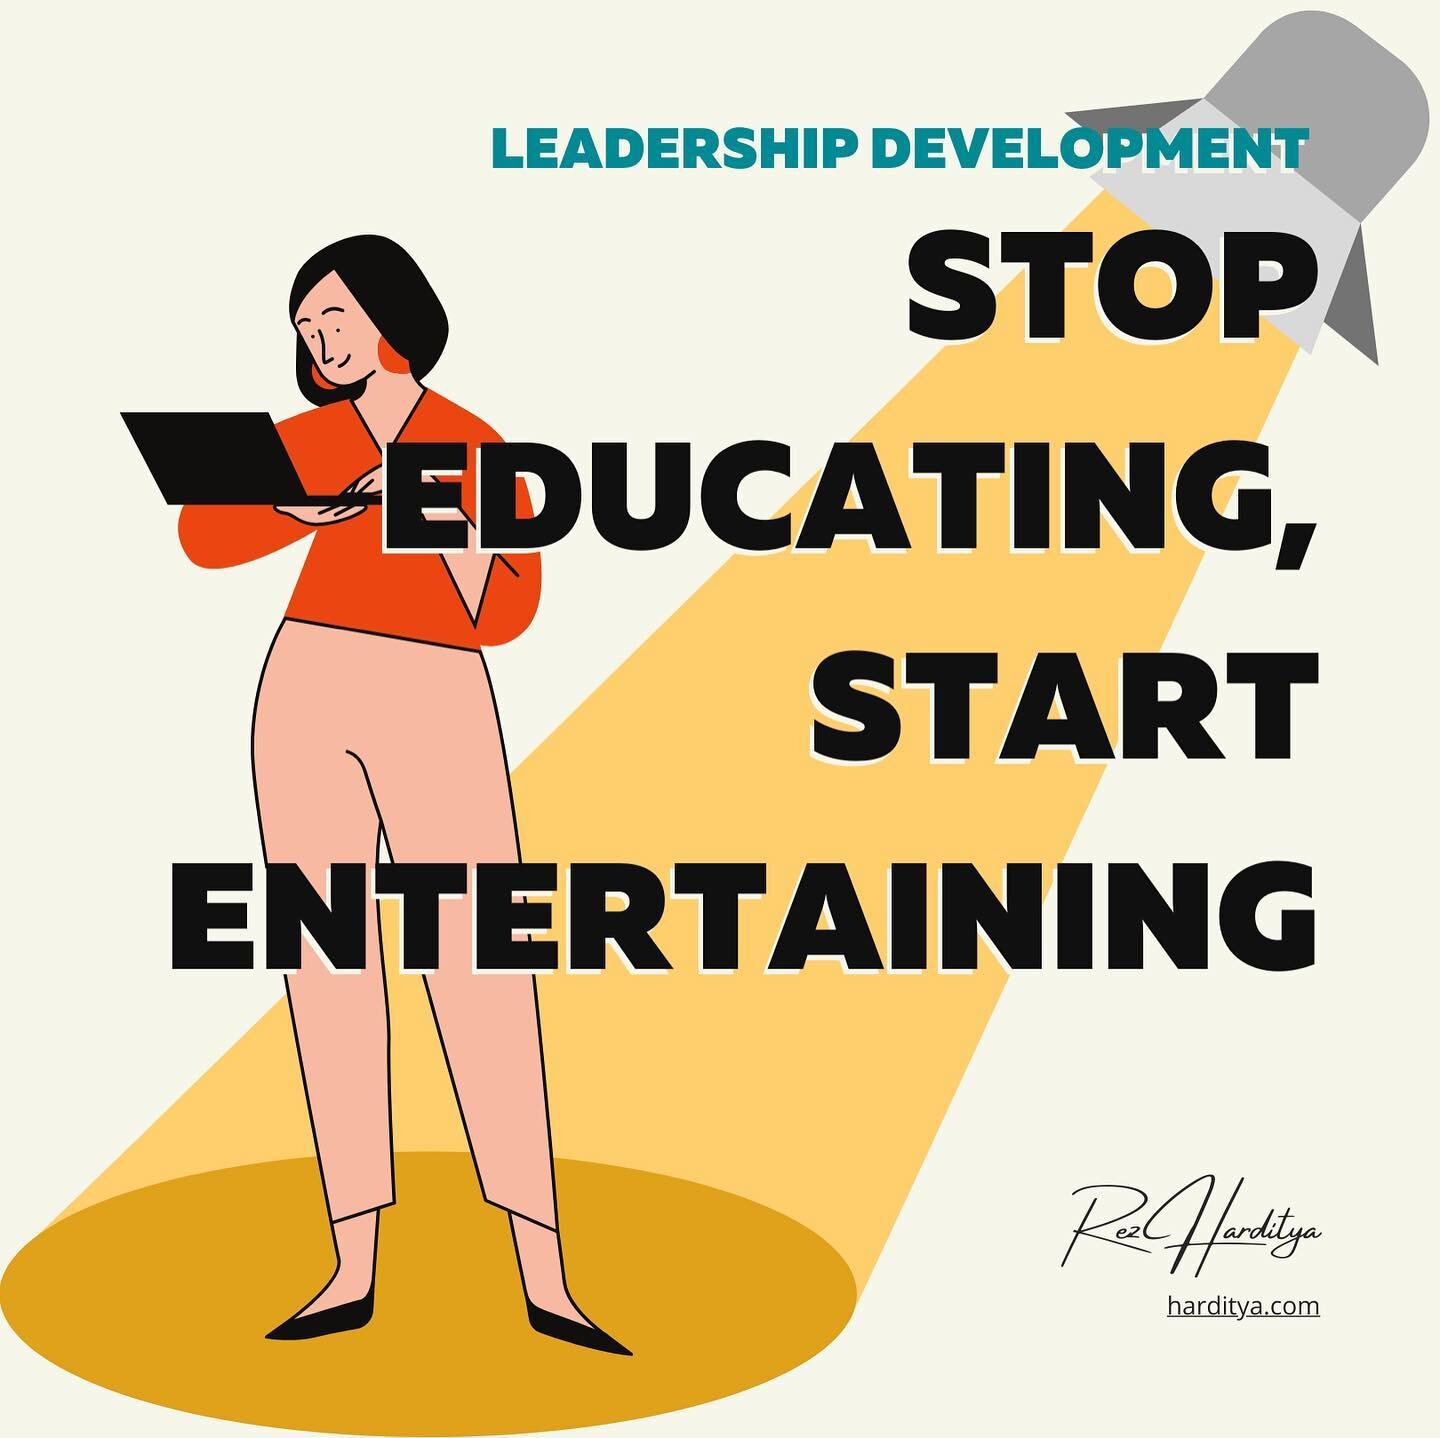 Hello leaders! Do you want to become a better educator? Do you want people to understand and enjoy what you're saying to them?

I made this just for you 💡

------
#agilecoaching #leadershipcoaching #personaldevelopment #leadershipdevelopment